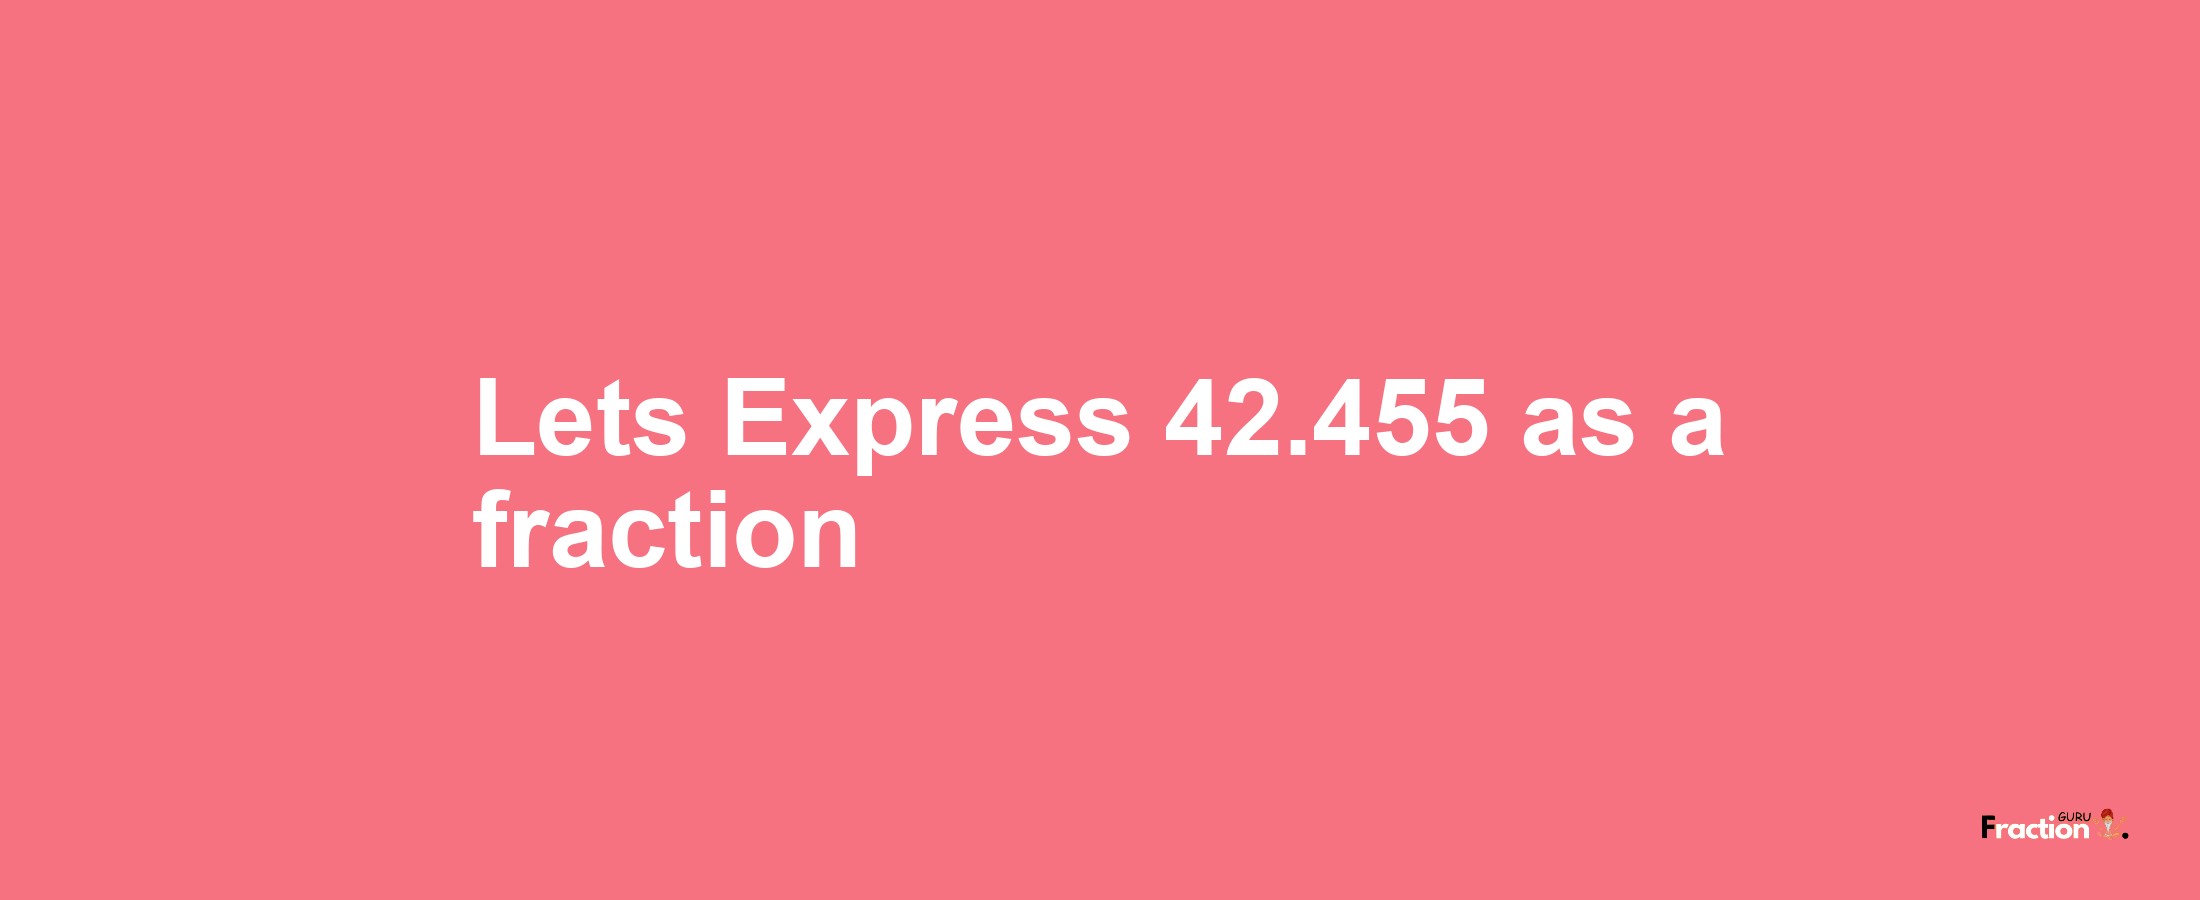 Lets Express 42.455 as afraction